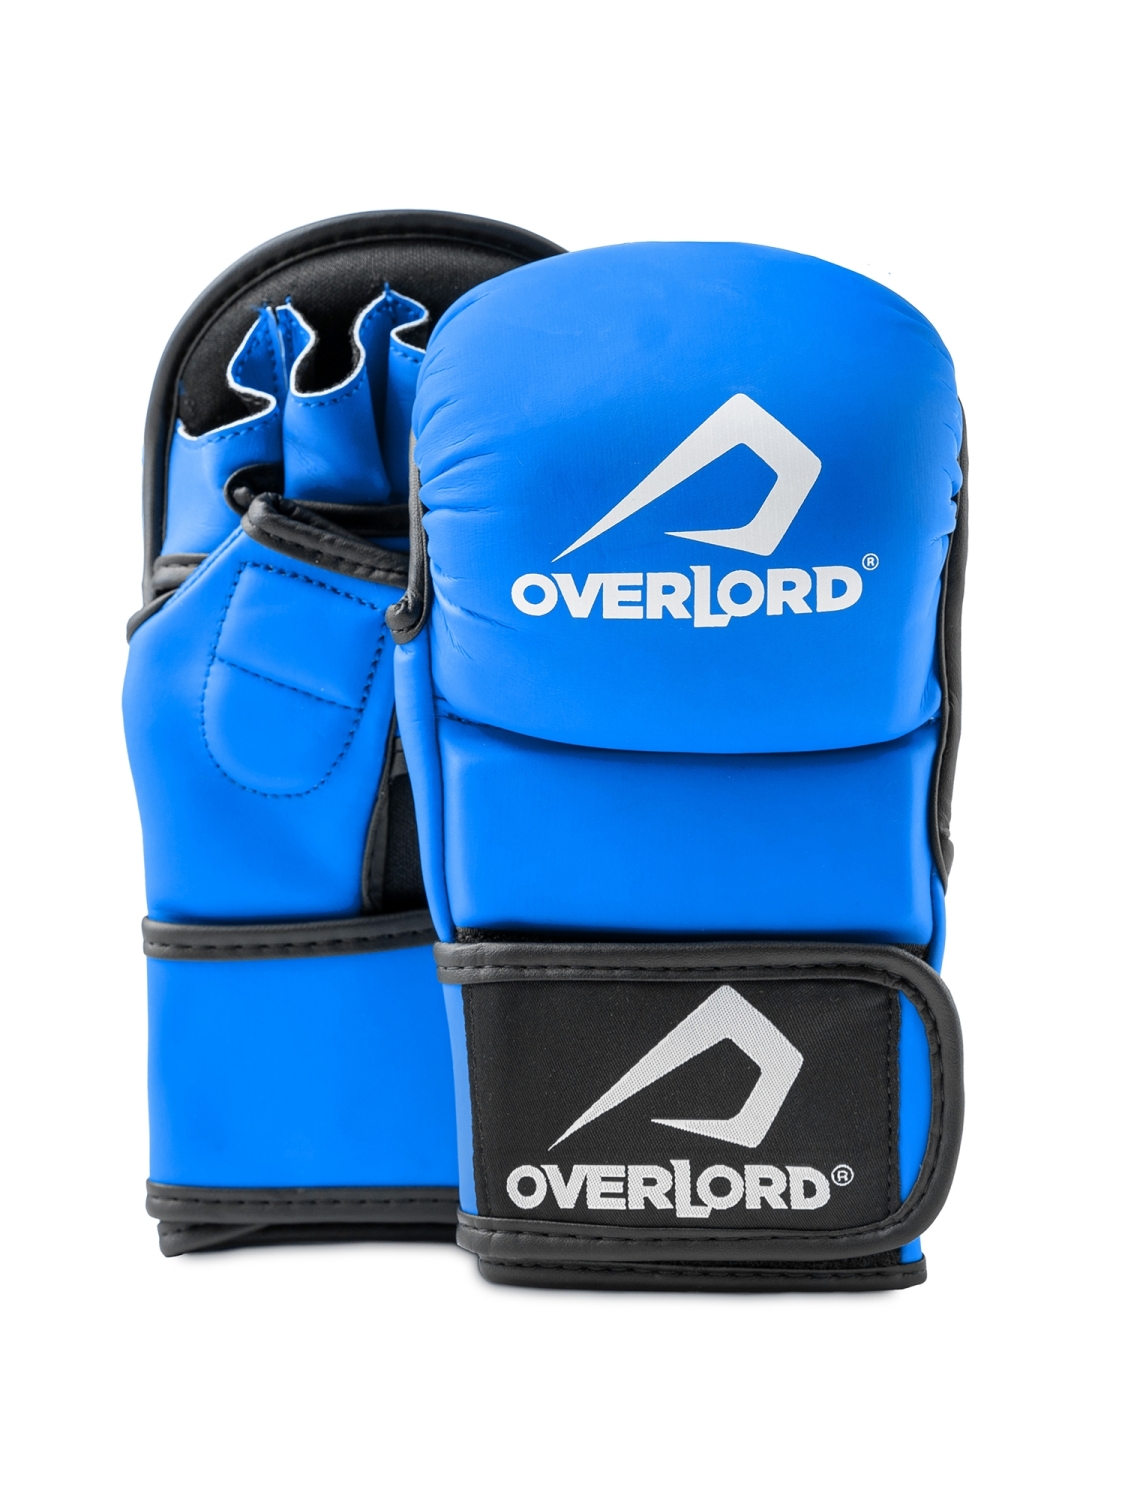 Overlord MMA Gloves Tournament